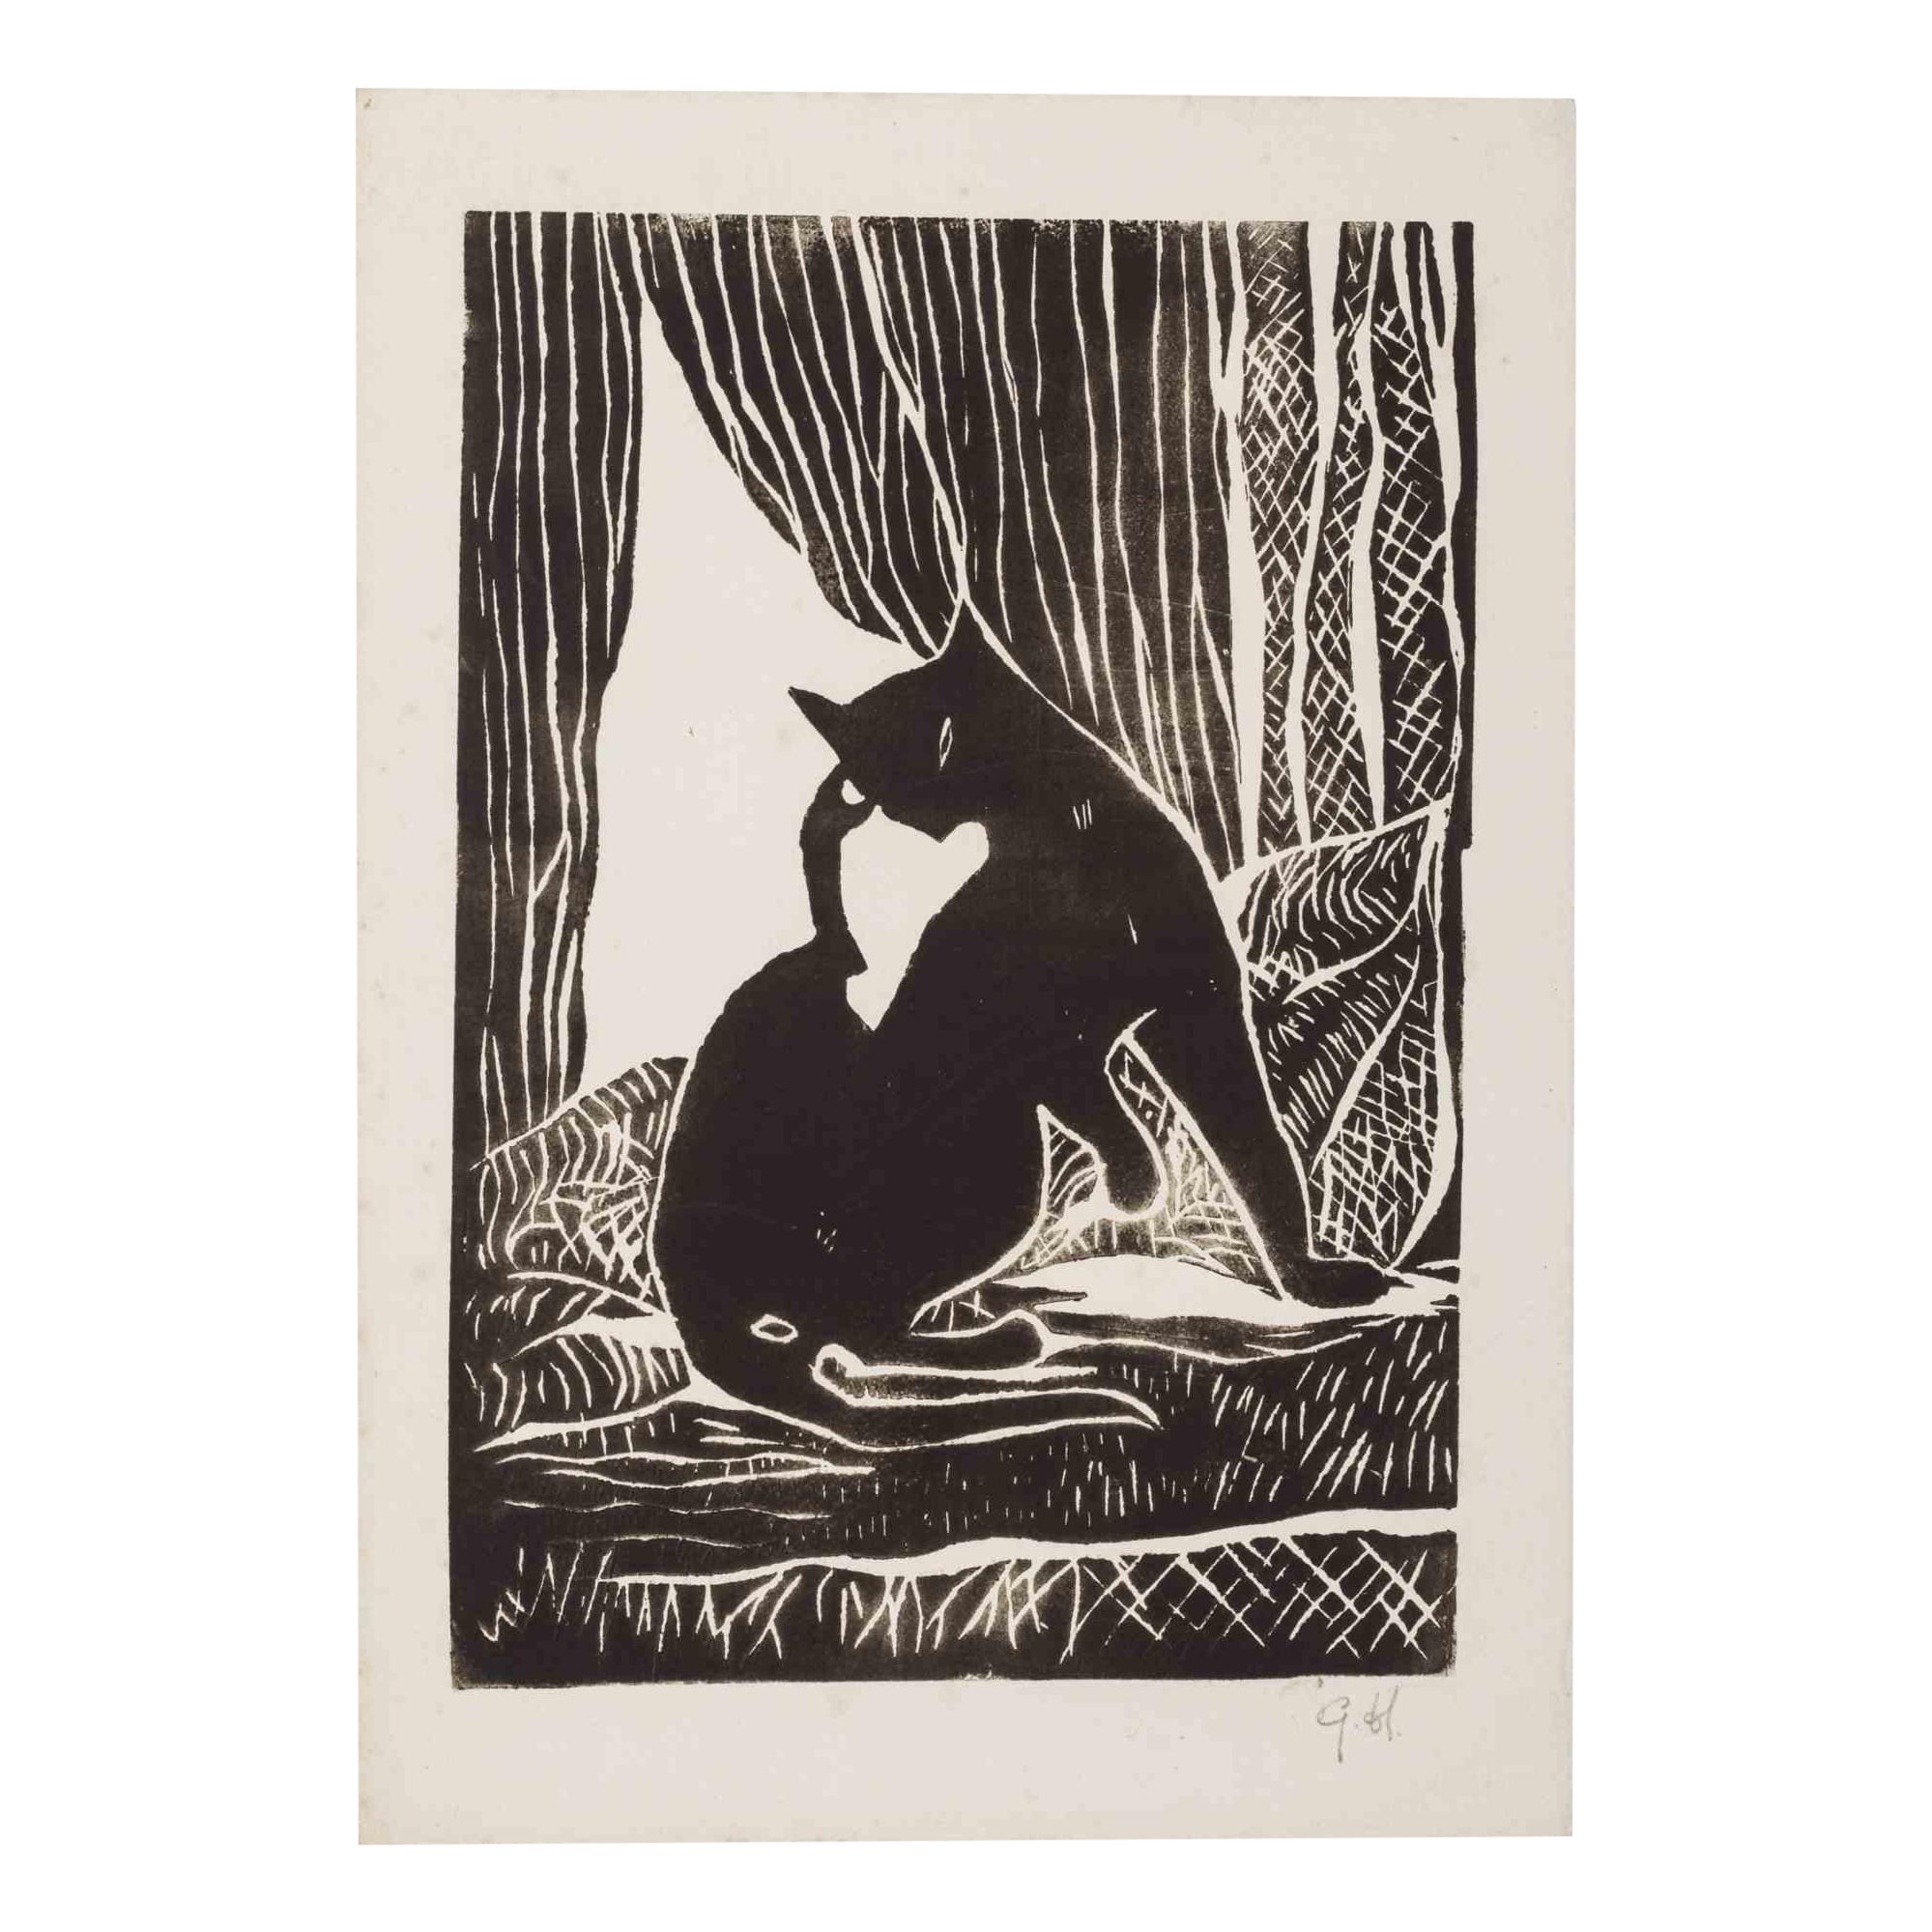 Cat -  Original Woodcut by Giselle Halff - Mid 20th Century